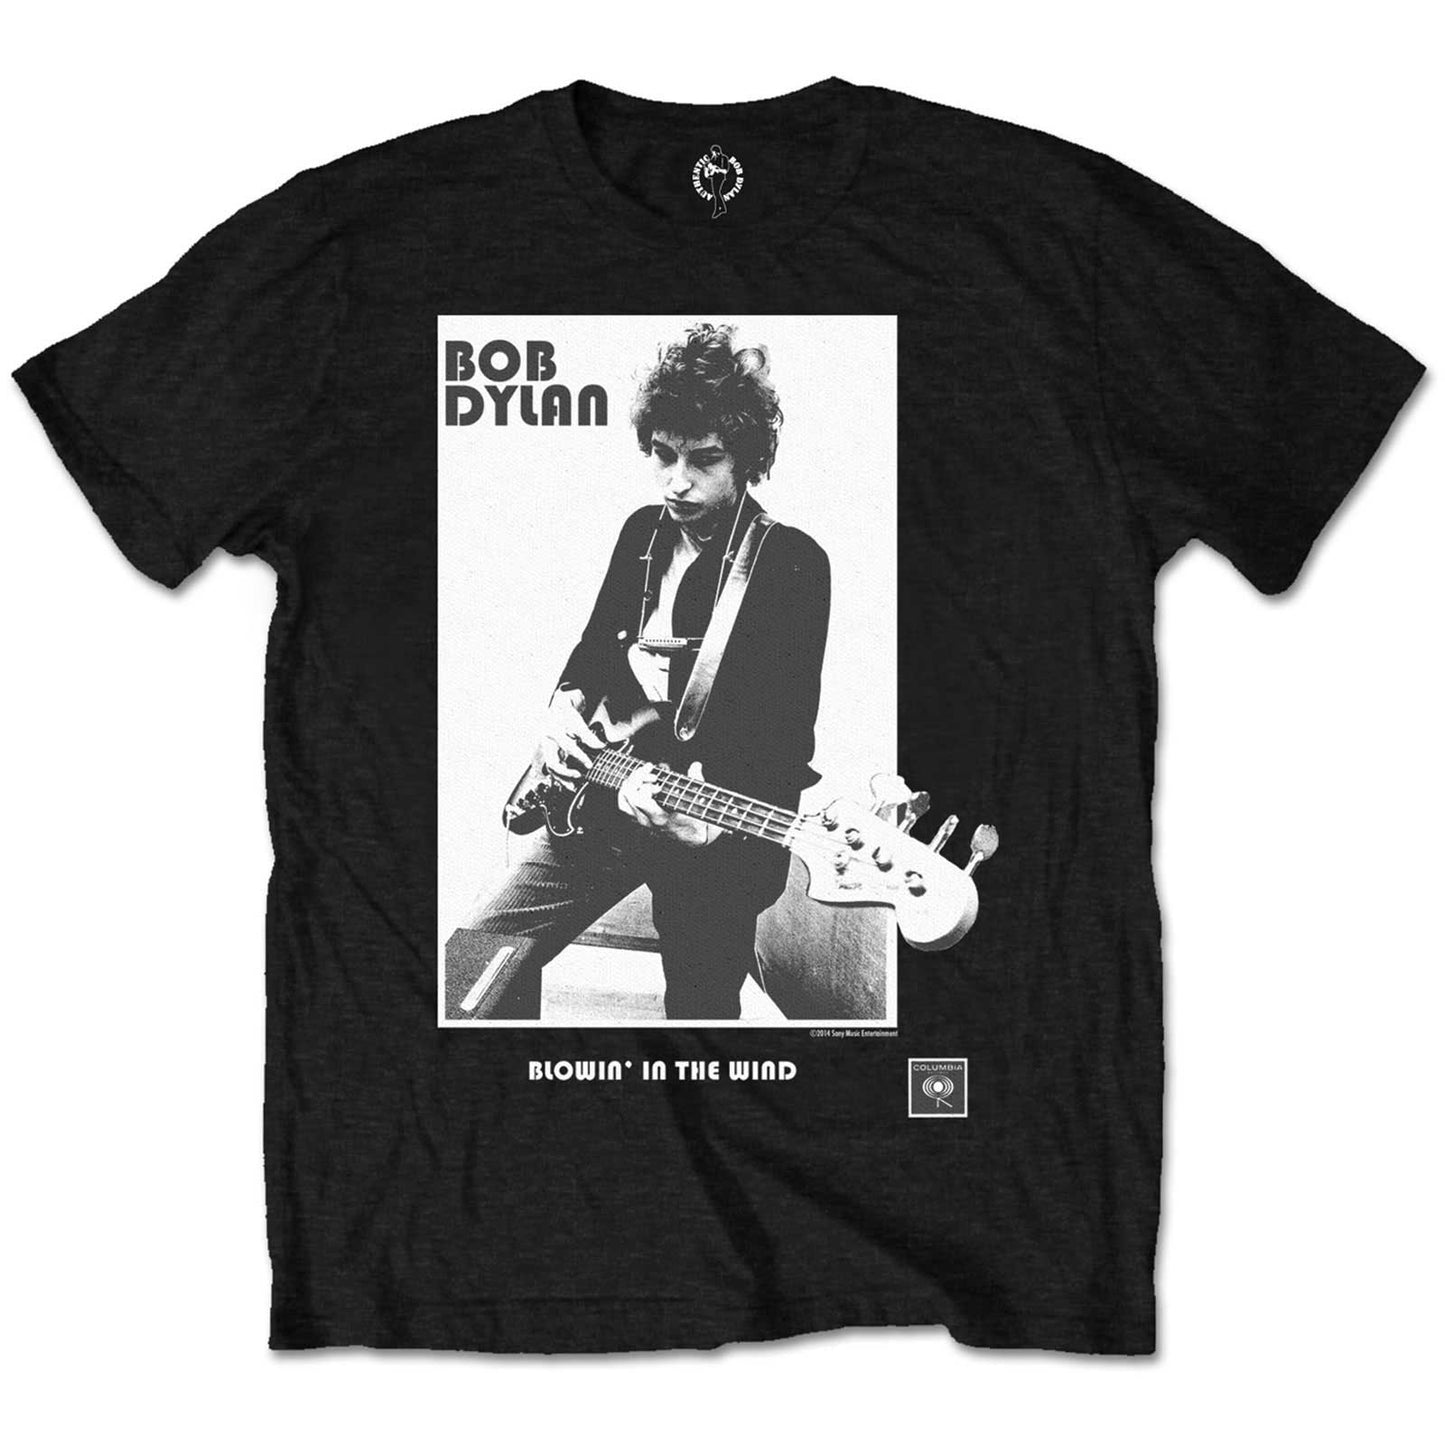 Bob Dylan T-Shirt: Blowing in the Wind